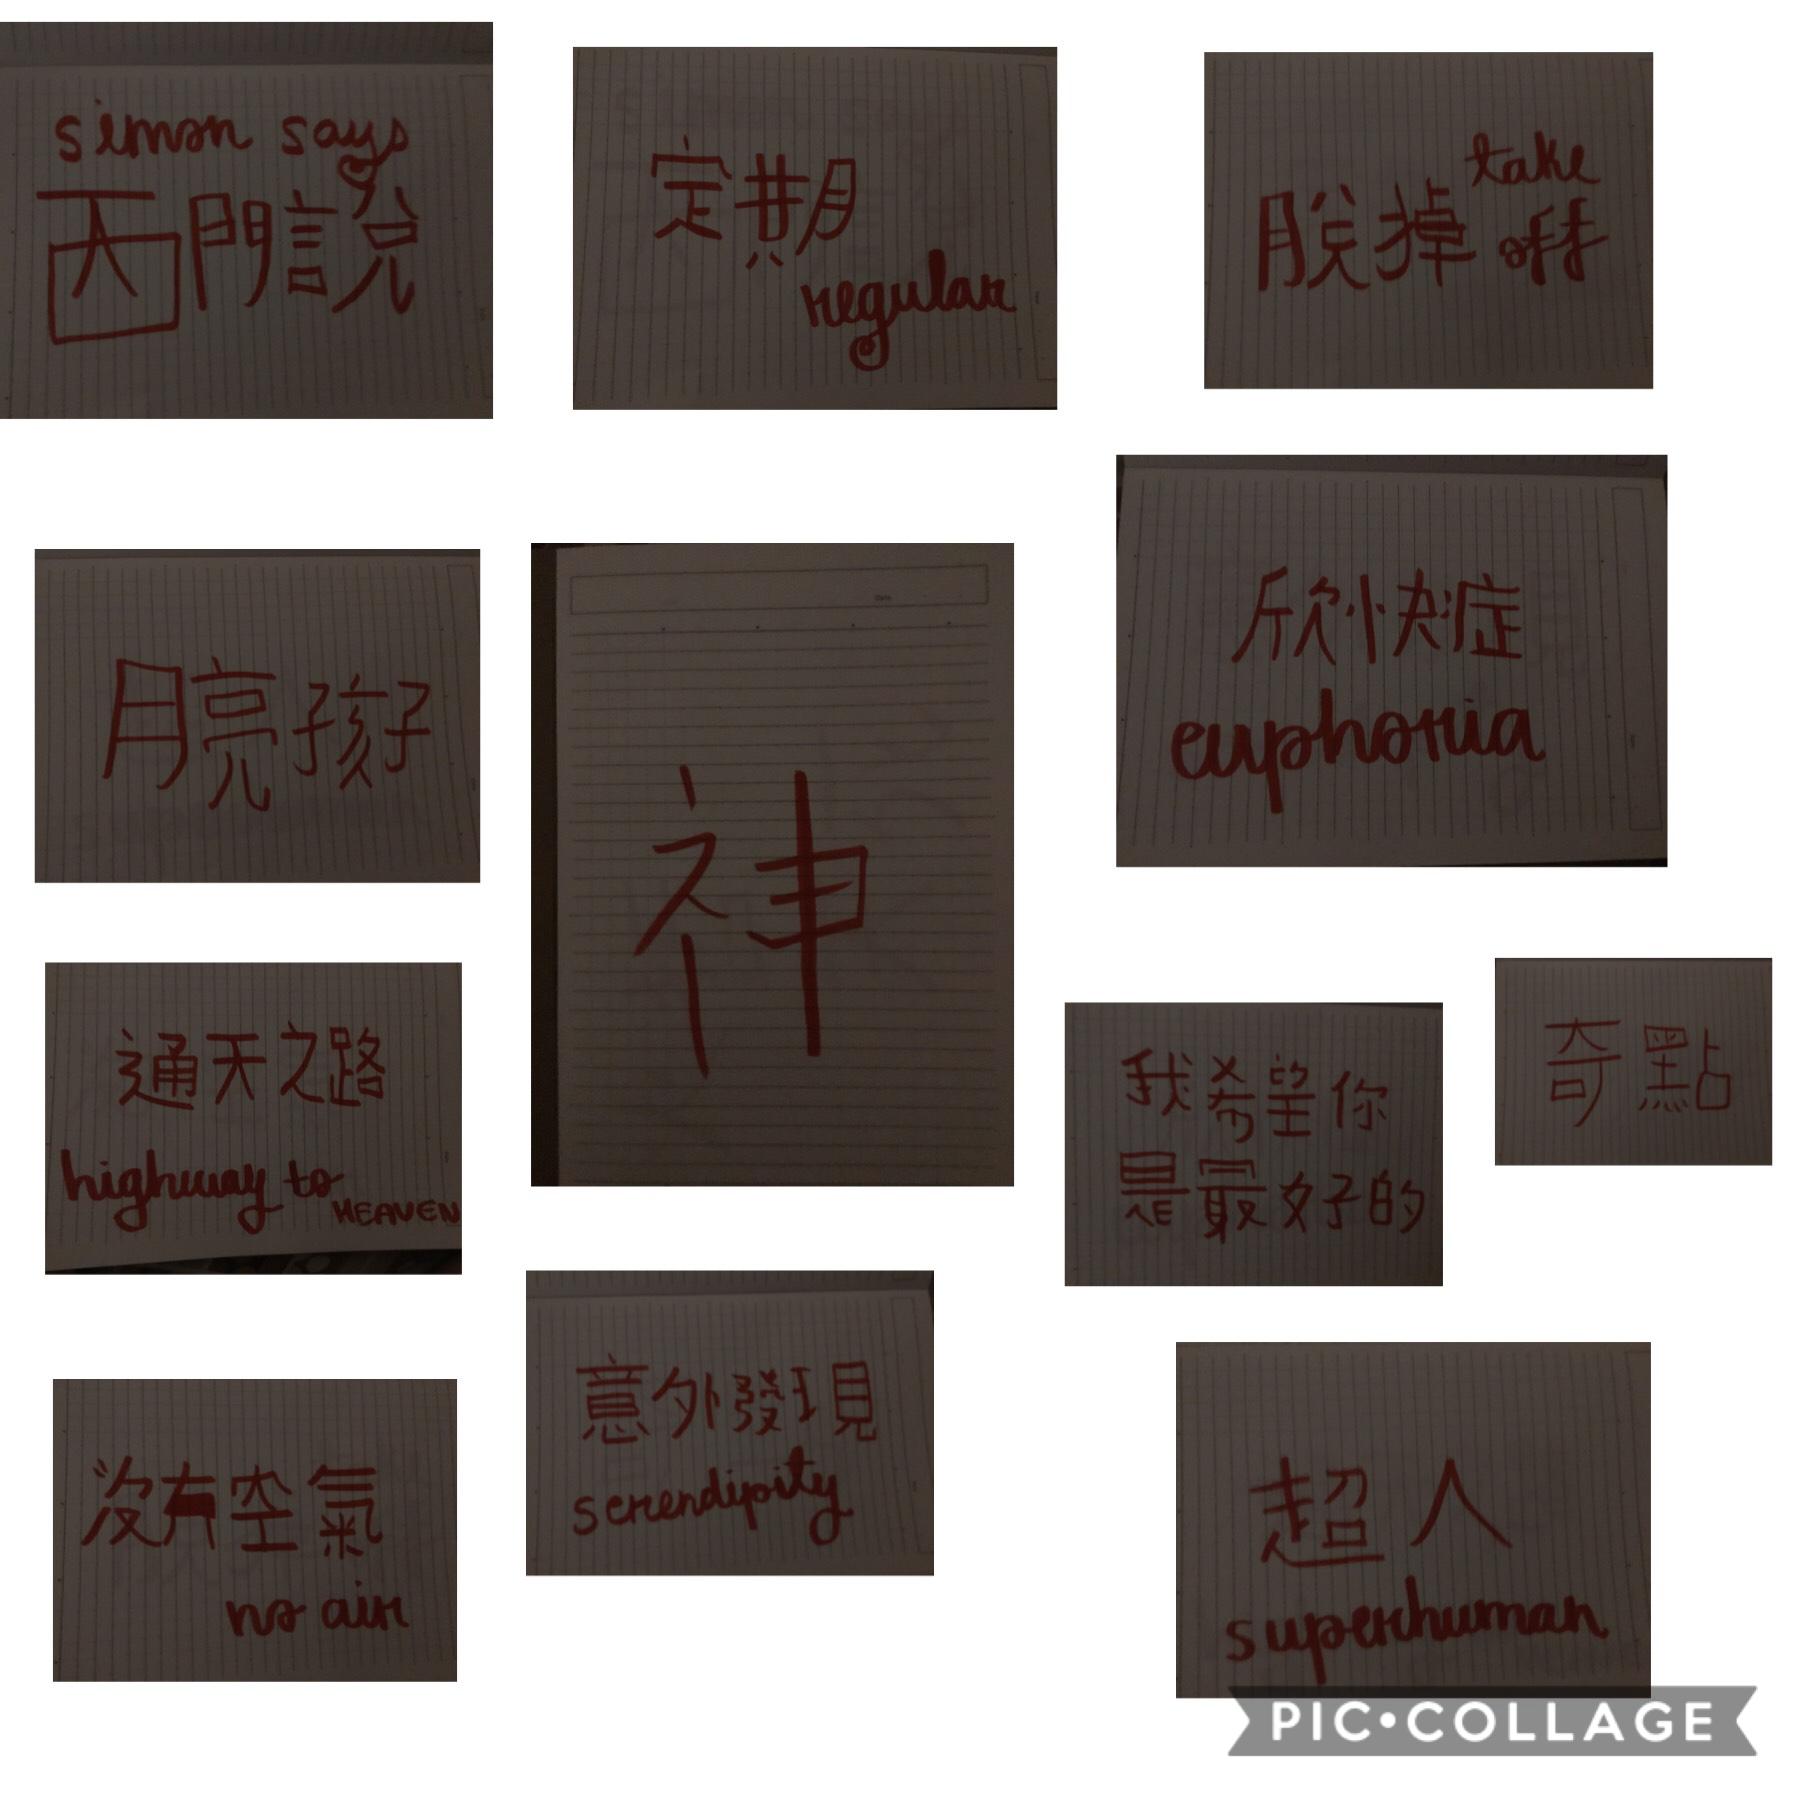 I’ve been doing a few Chinese pieces, please ignore the messy handwriting 

